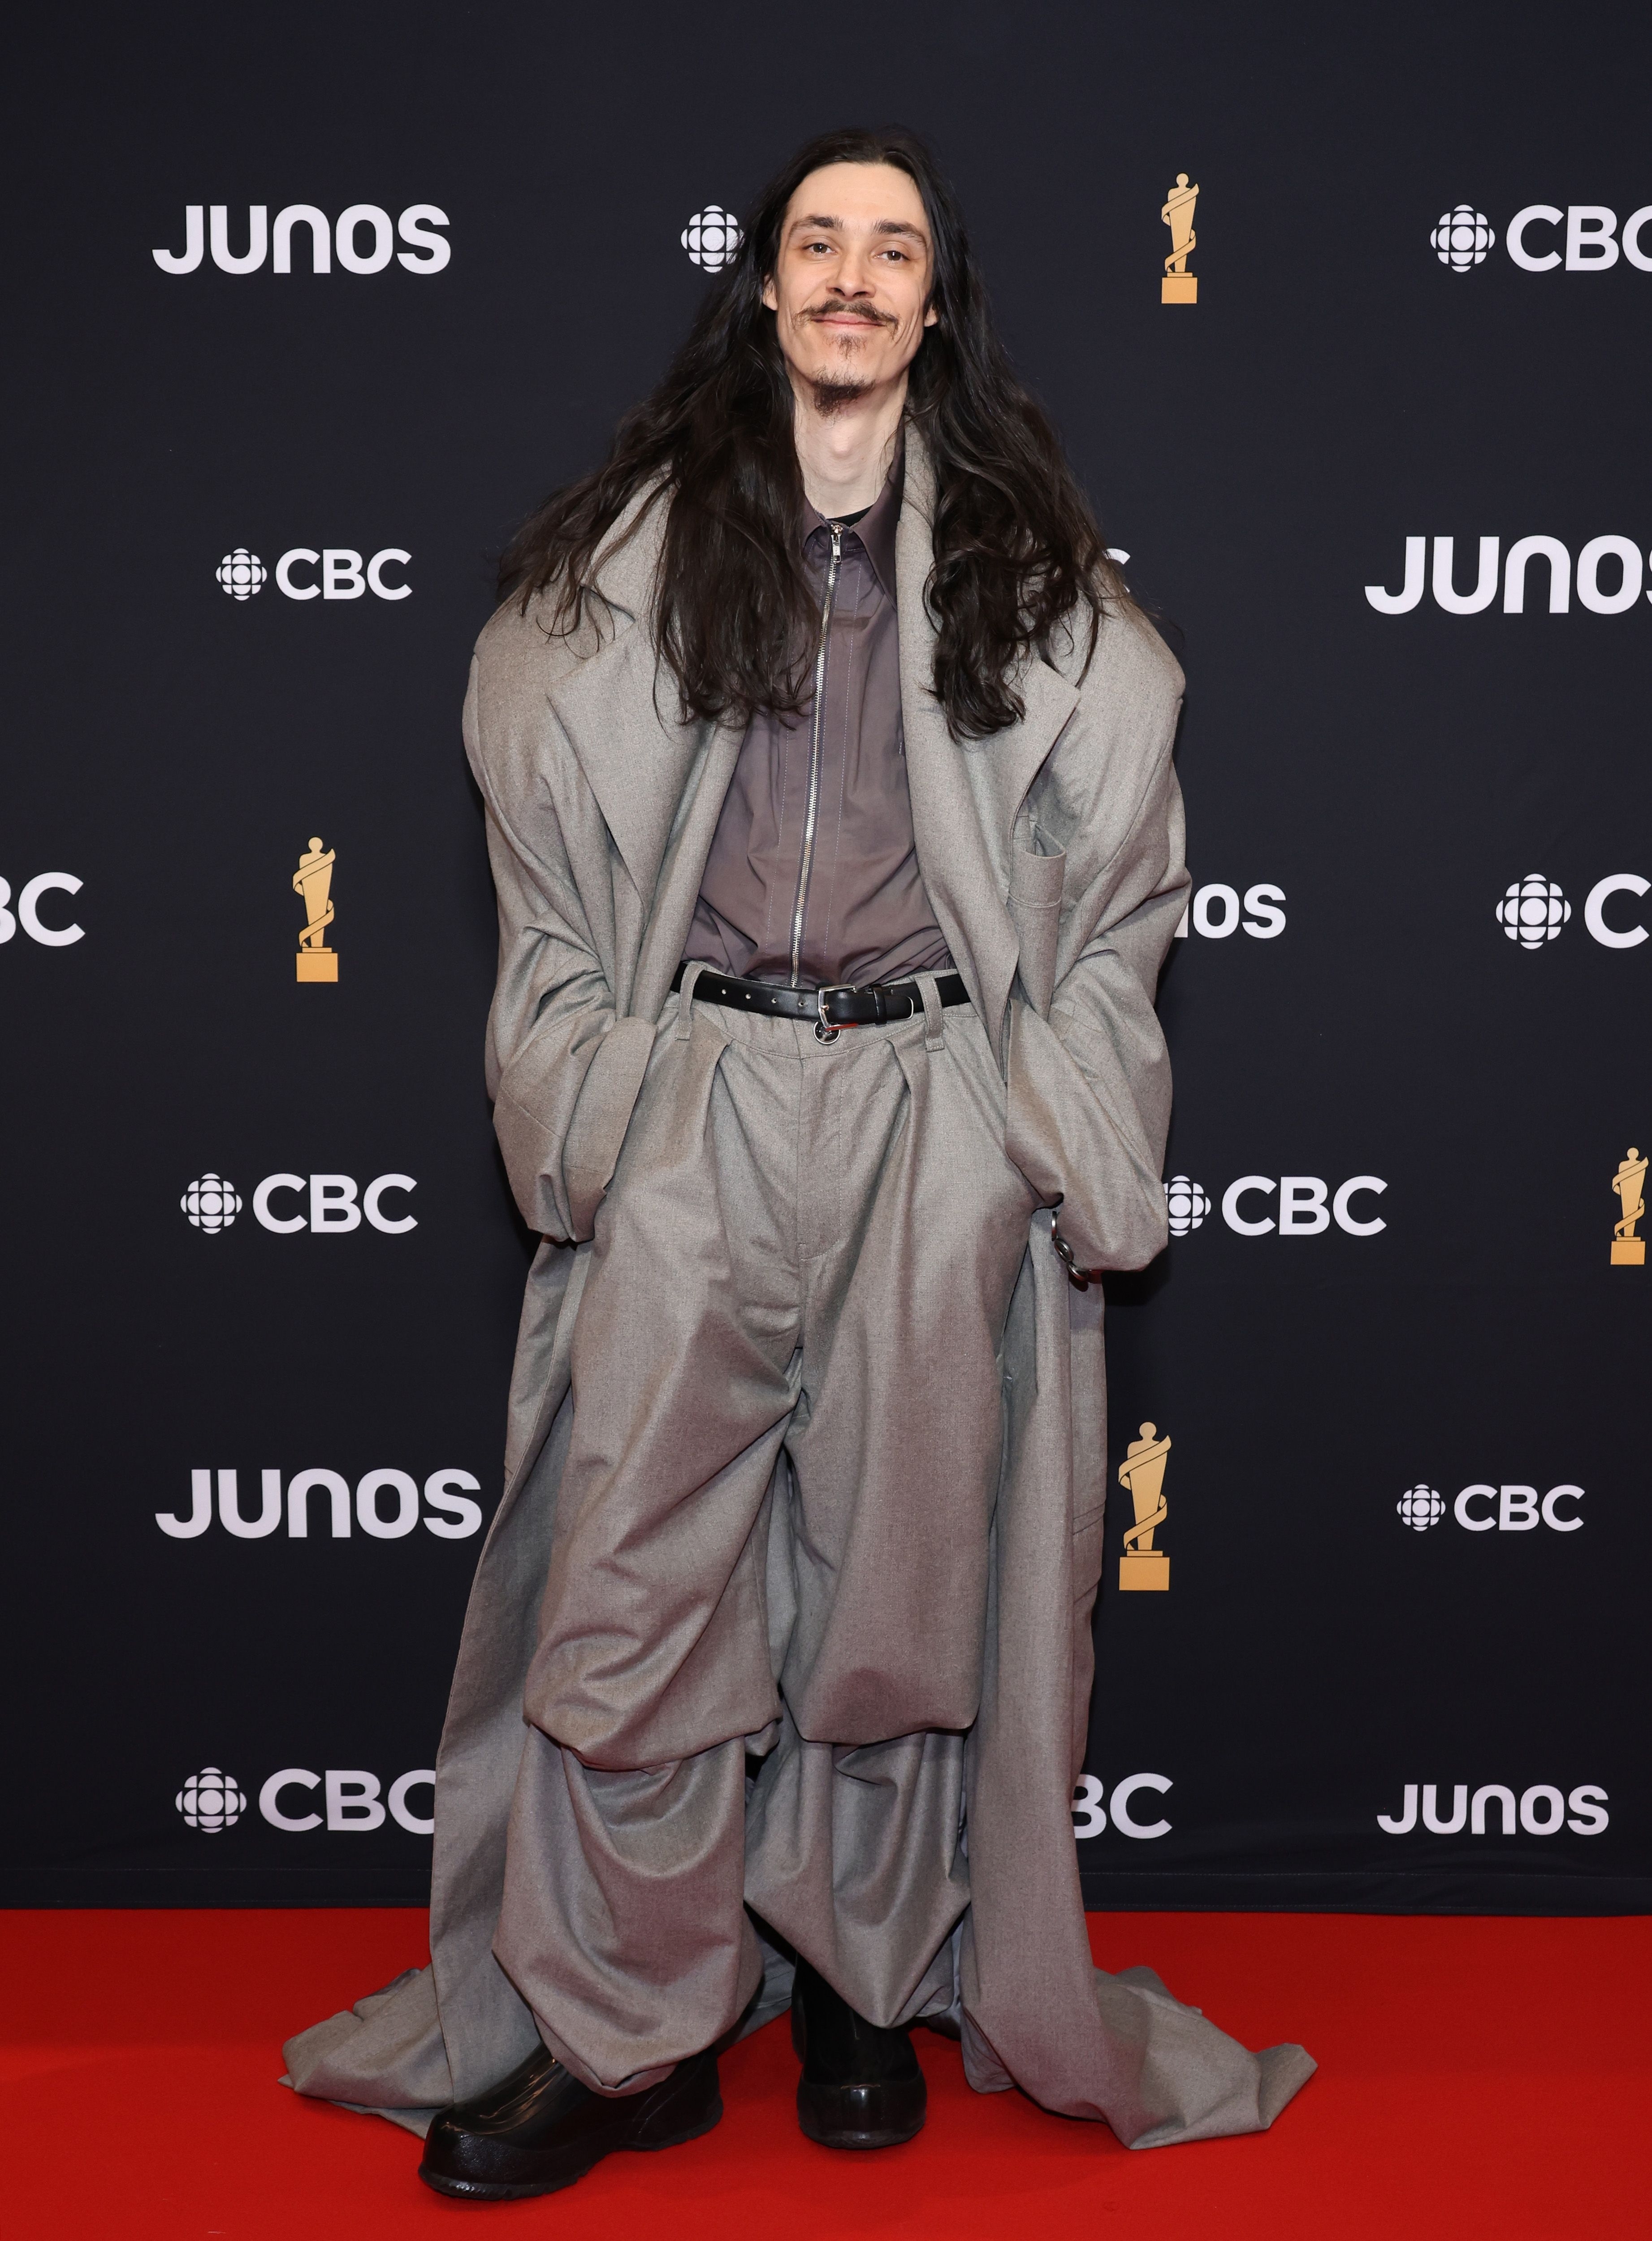 Person in oversized gray suit and long coat poses at event with &#x27;JUNOS CBC&#x27; backdrop